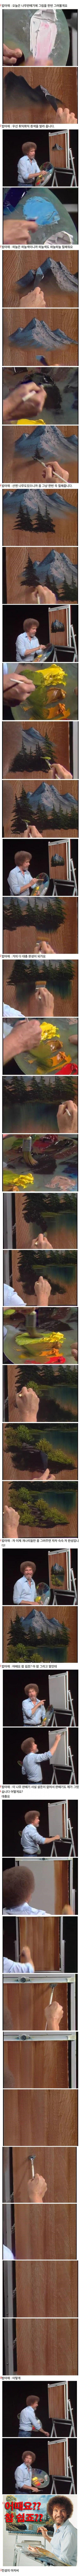 a twist in Bob Ross's painting